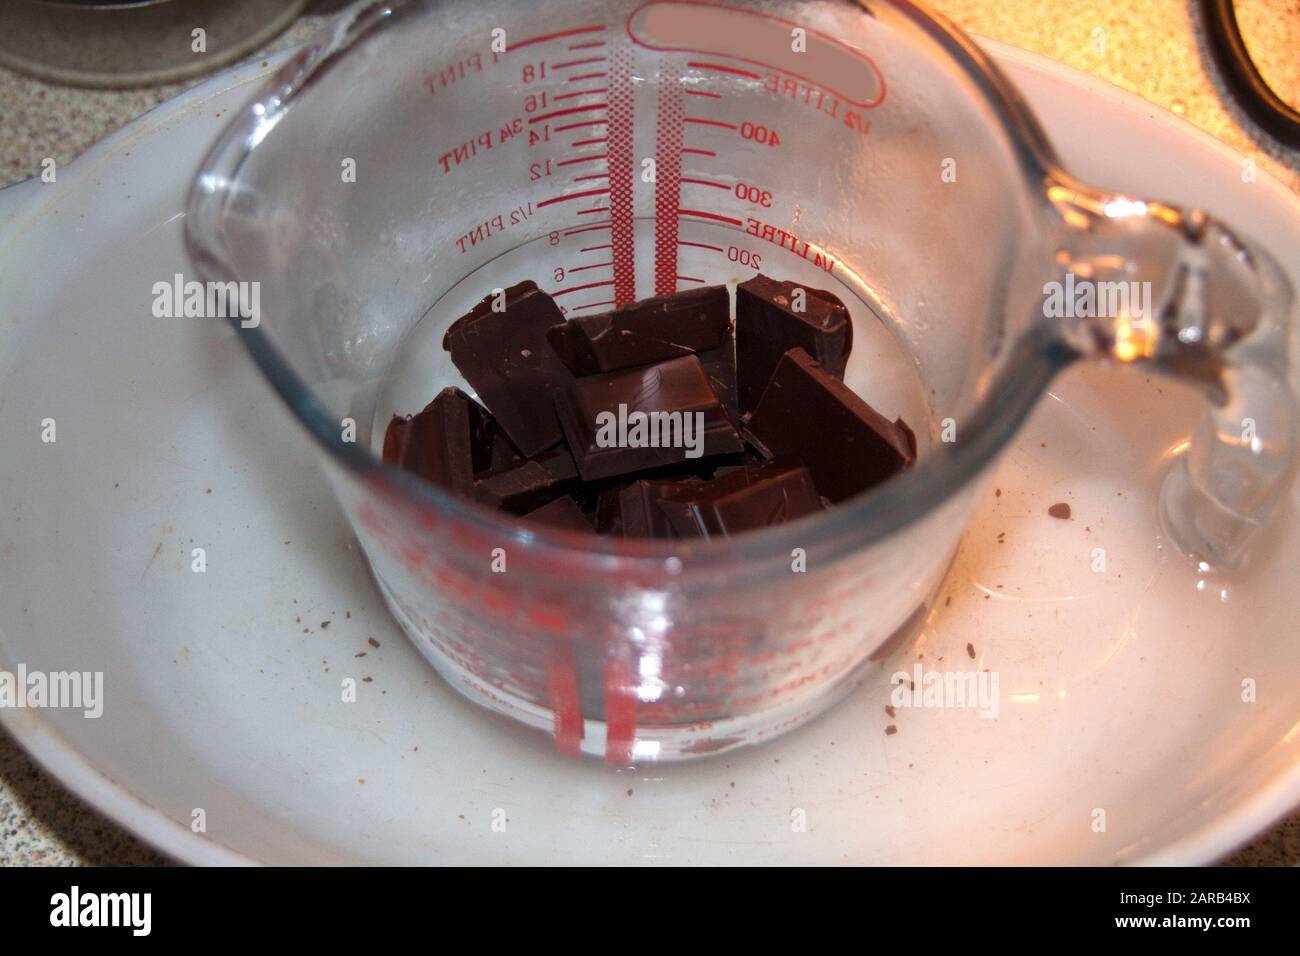 Melting Chocolate in the Kitchen Stock Photo